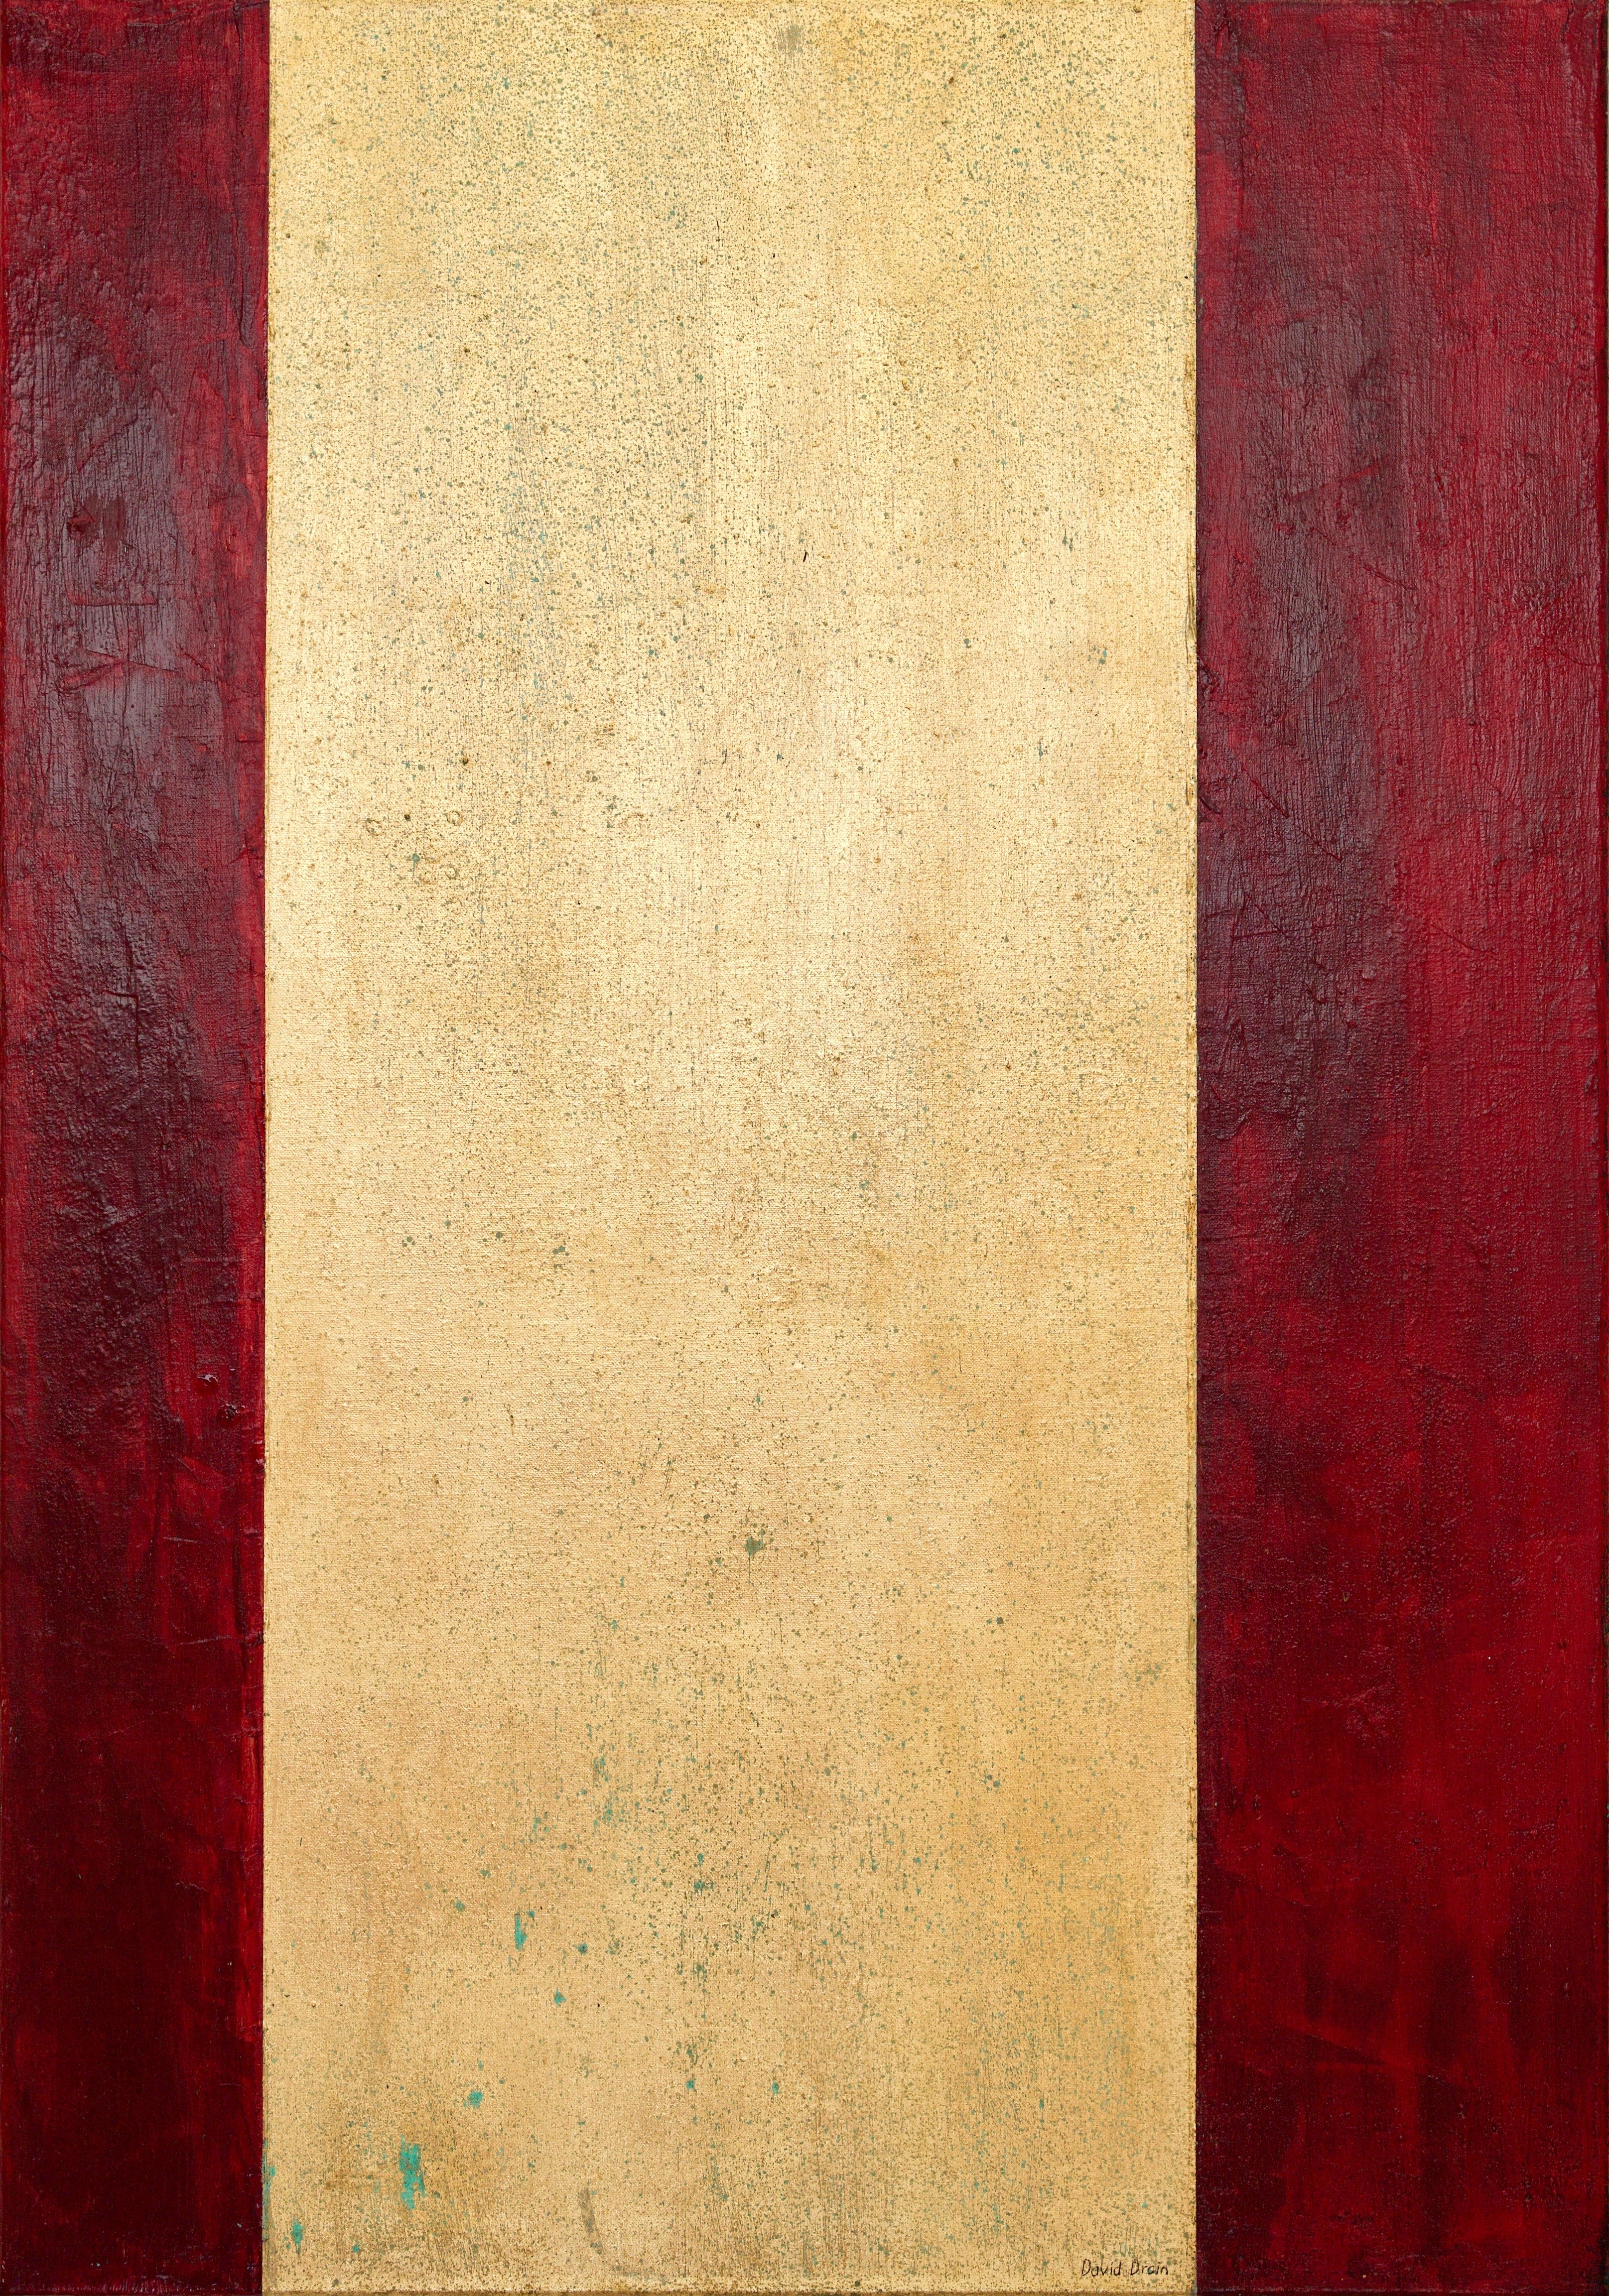 Red & Gold I (SOLD) <br> 100 x 70 x 2 cm